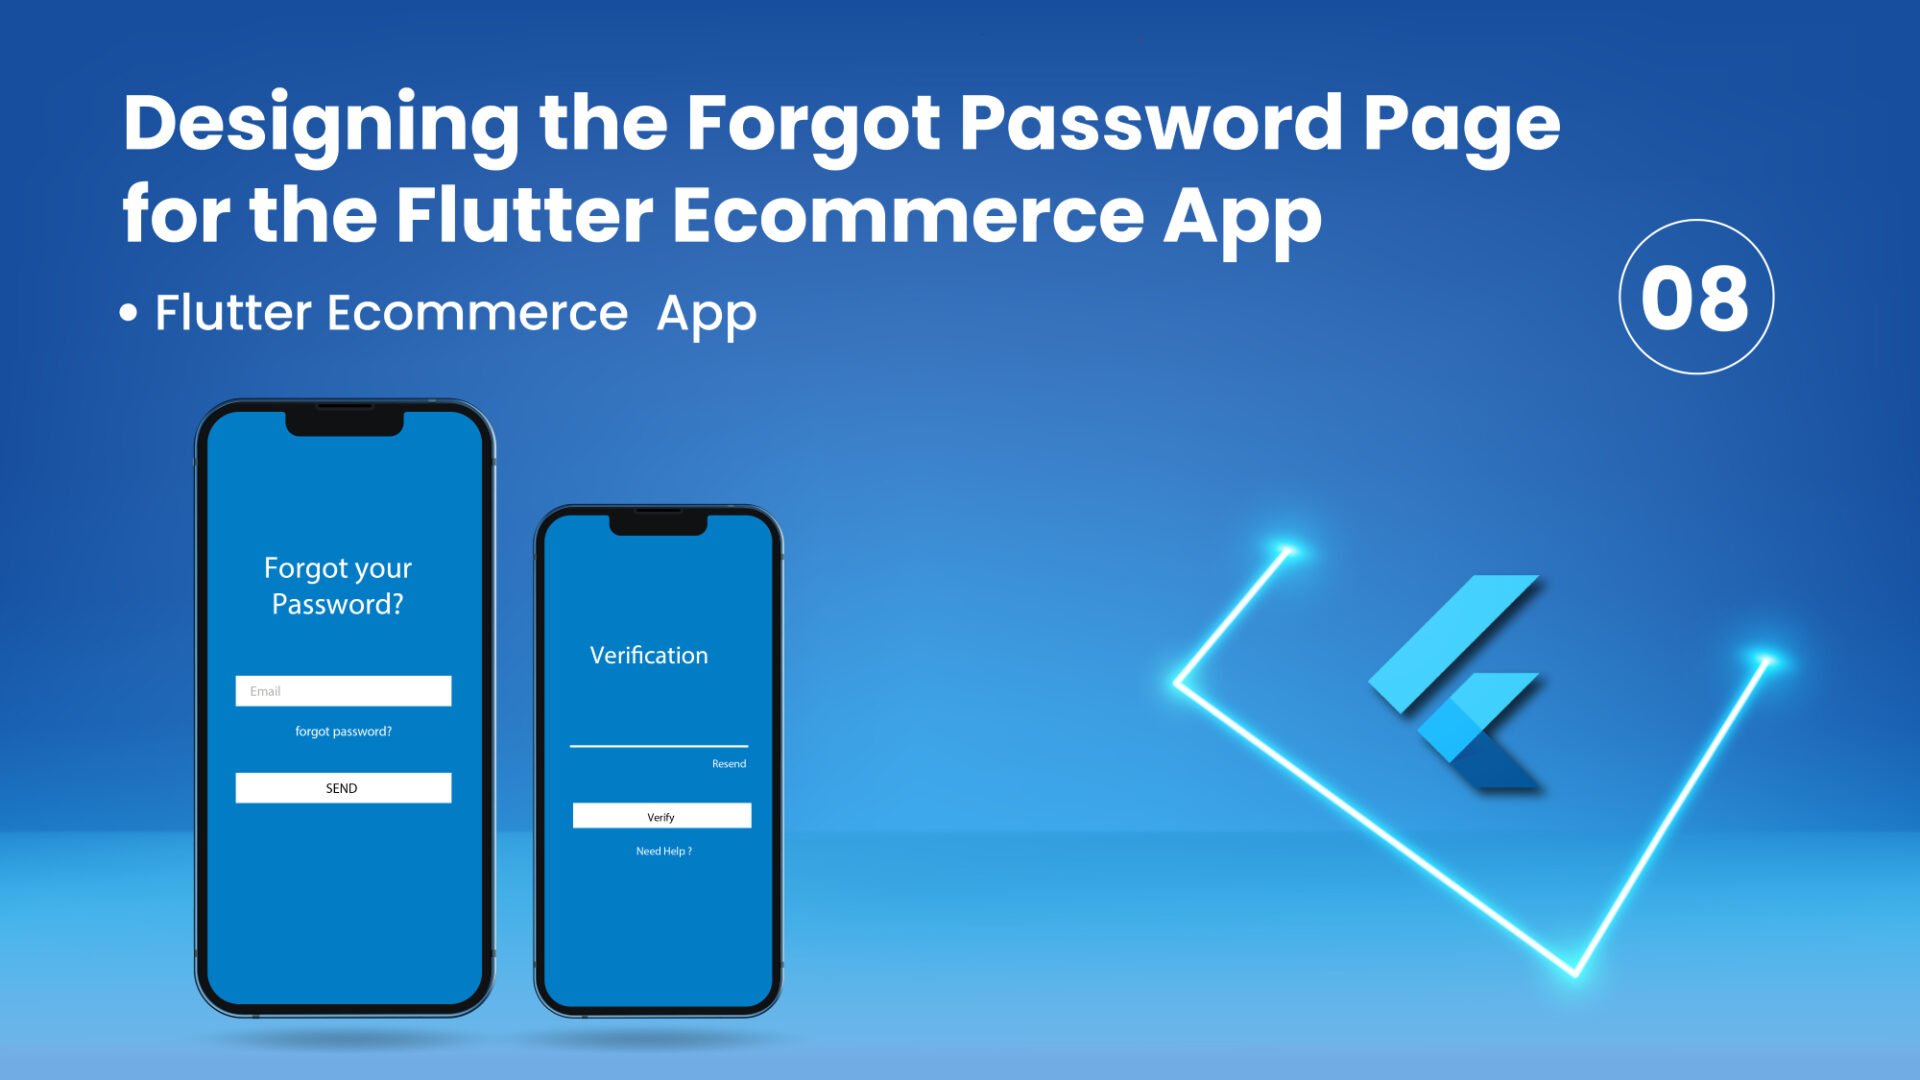 Designing the Forgot Password Page for the Flutter Ecommerce App